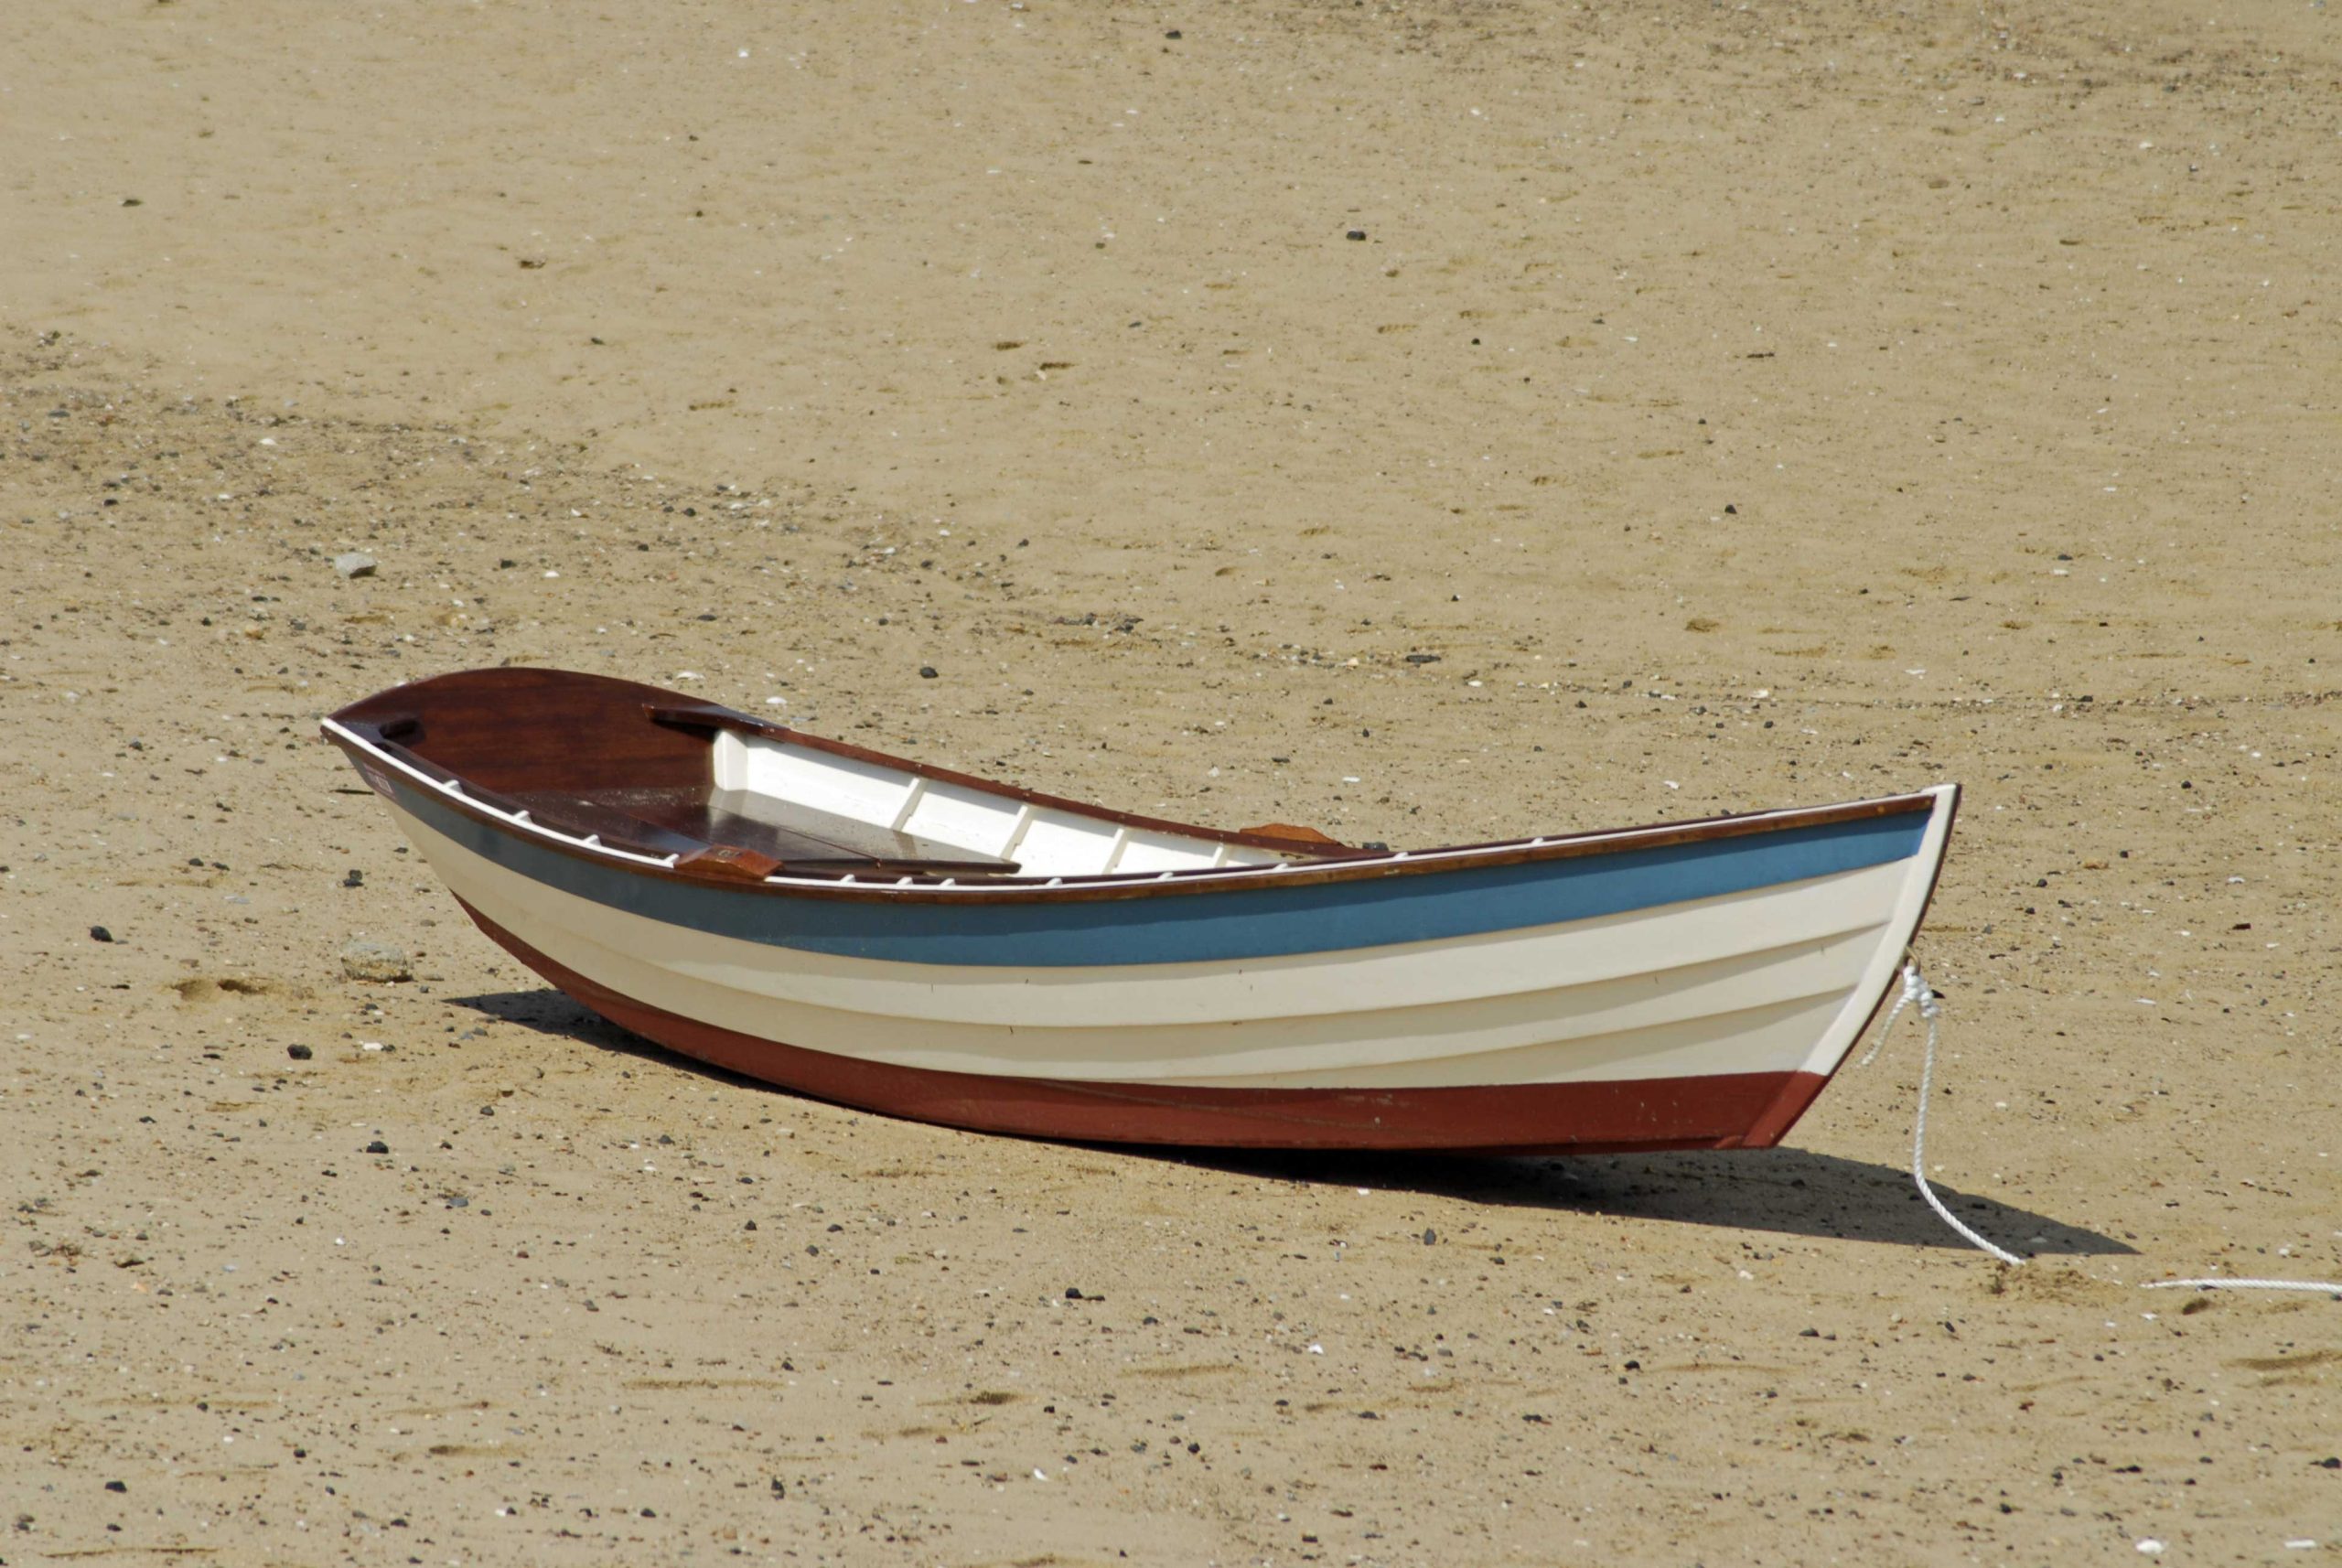 Provincetown Boat (user submitted)